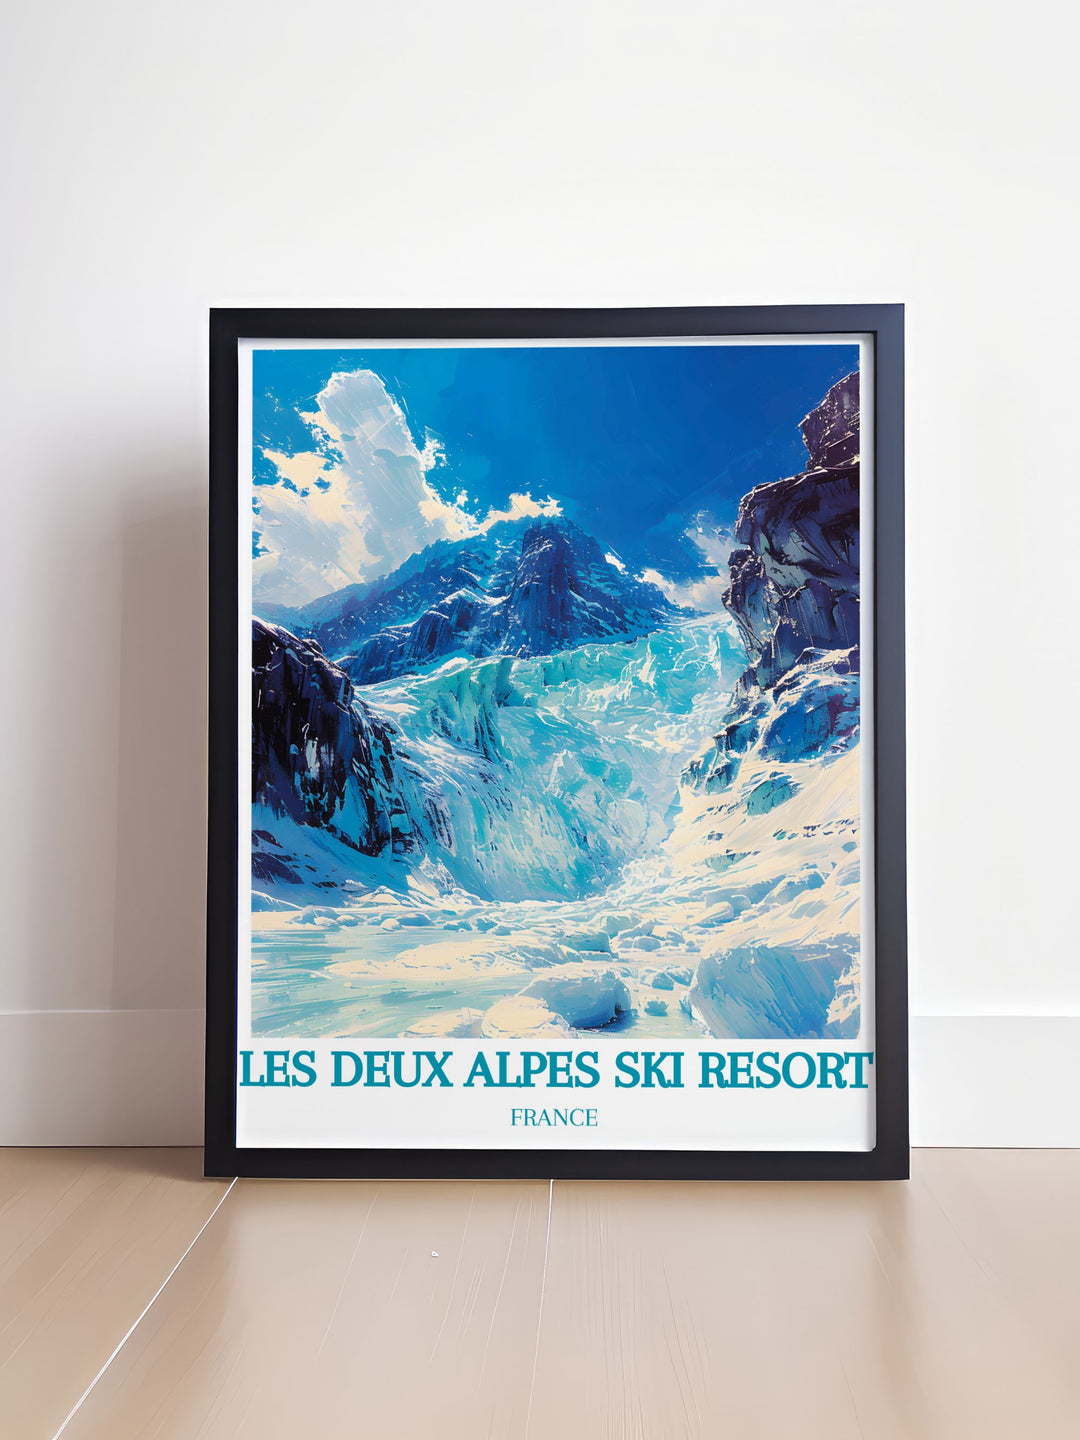 This detailed poster of Les Deux Alpes Ski Resort illustrates the expansive ski area and dynamic atmosphere, making it an excellent addition to any skiers art collection.